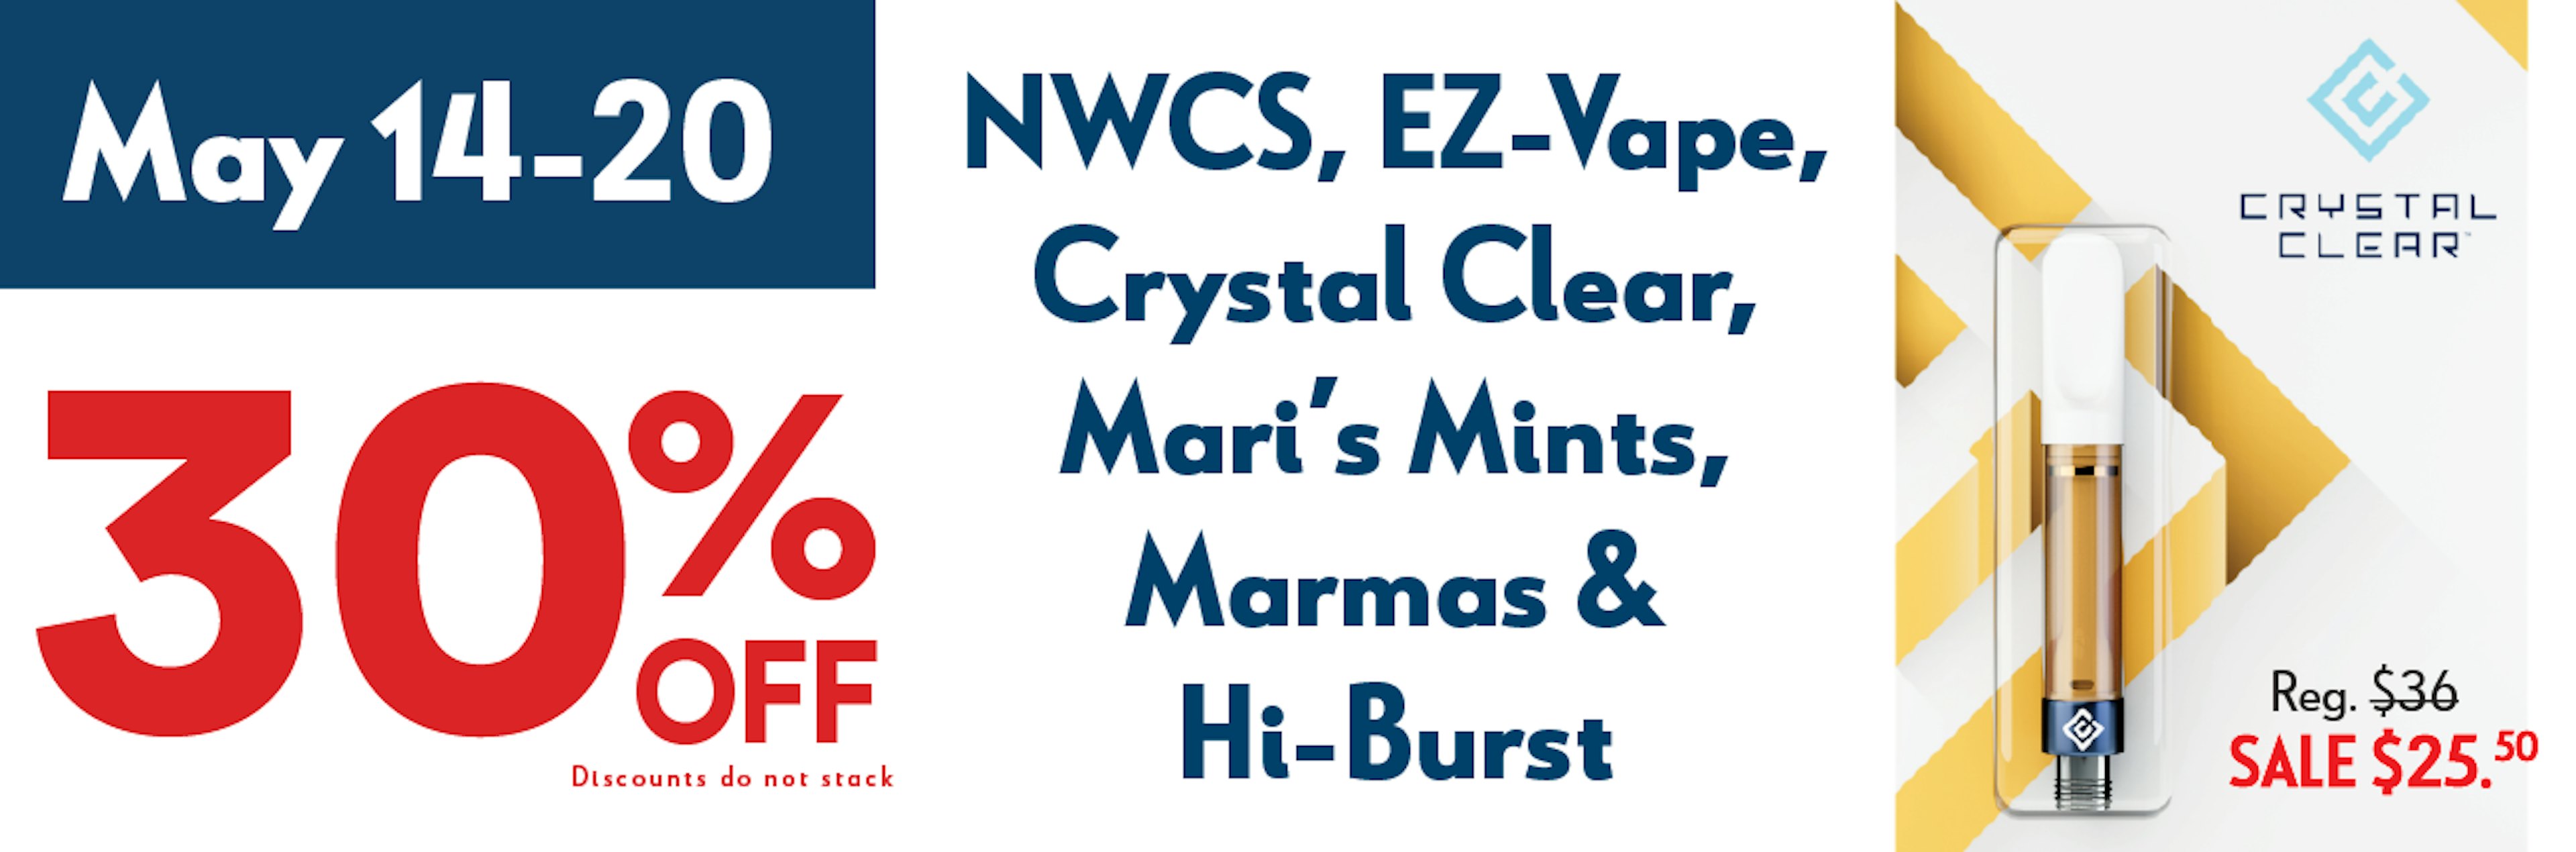 30% Off All NWCS Brands!